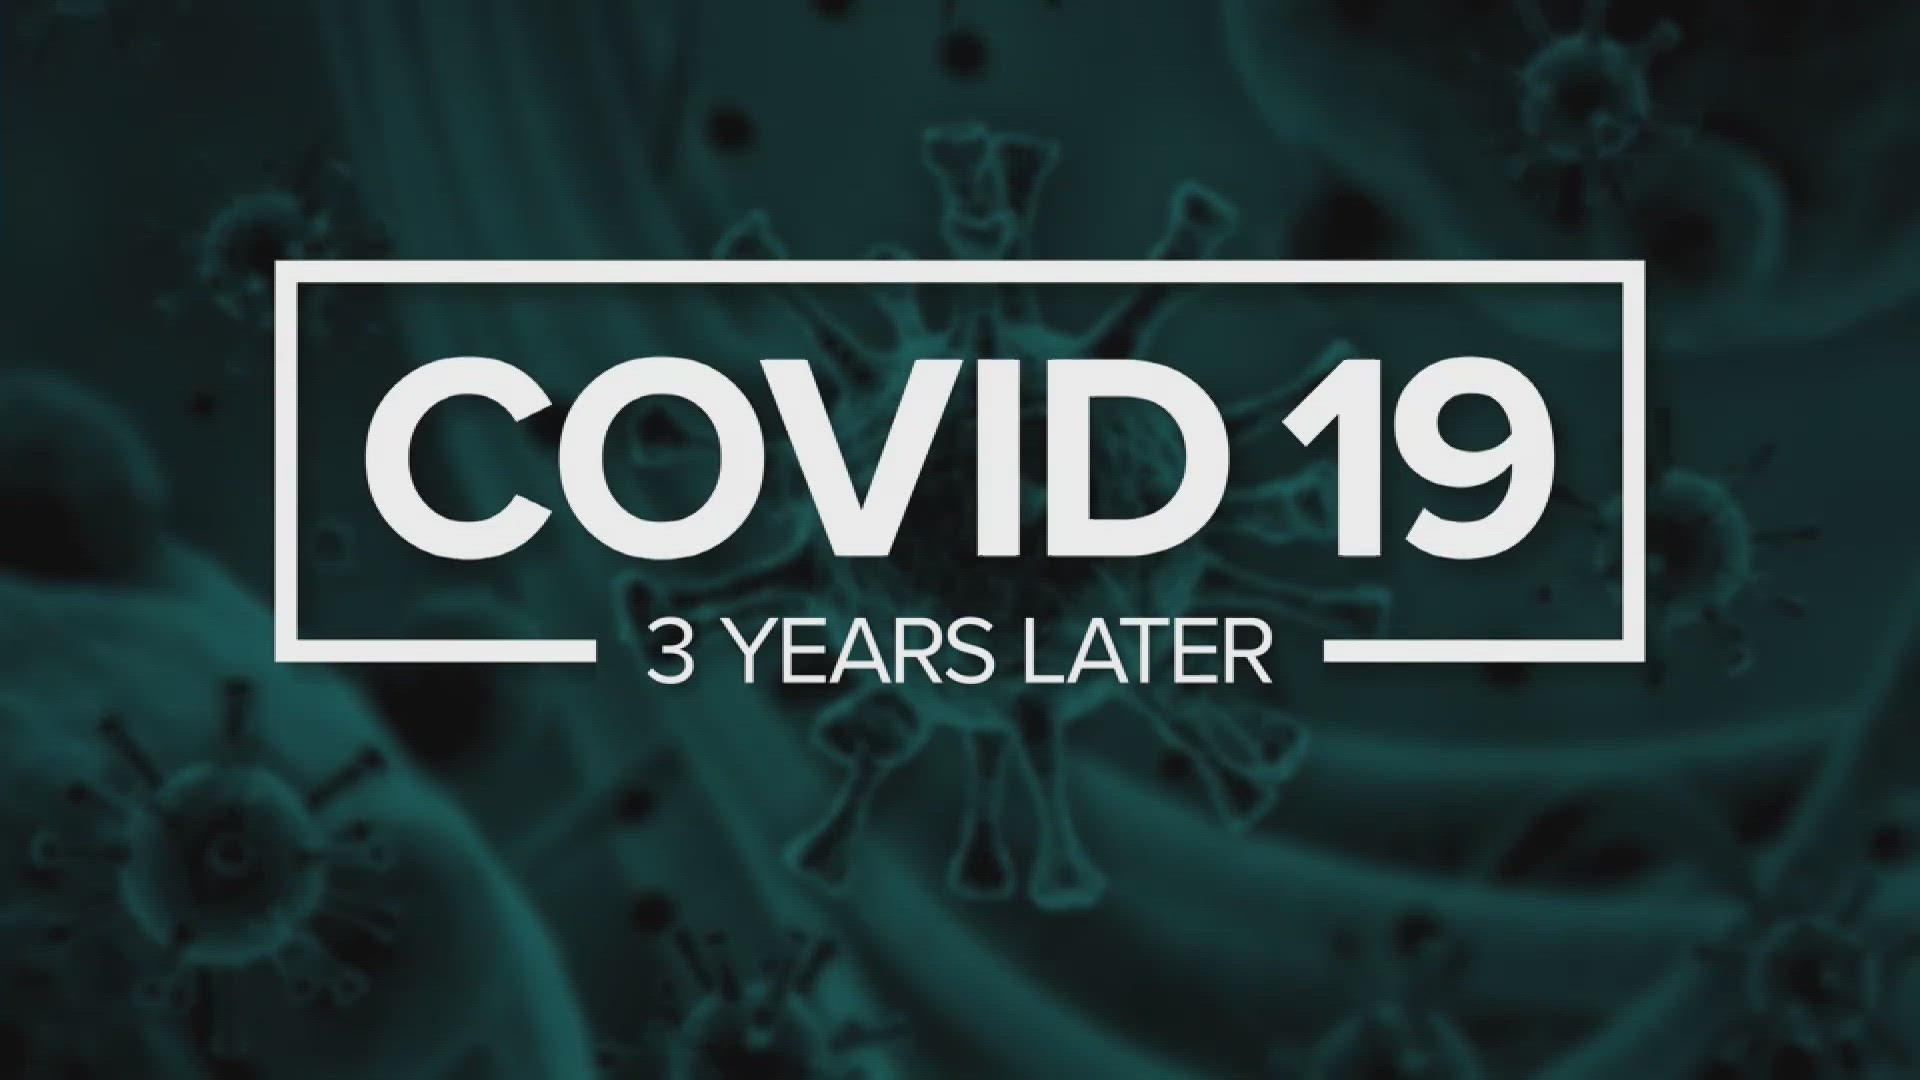 It's been three years since the start of the COVID-19 pandemic in East Tennessee. We remember the lives we lost and celebrate the advances in medicine since then.